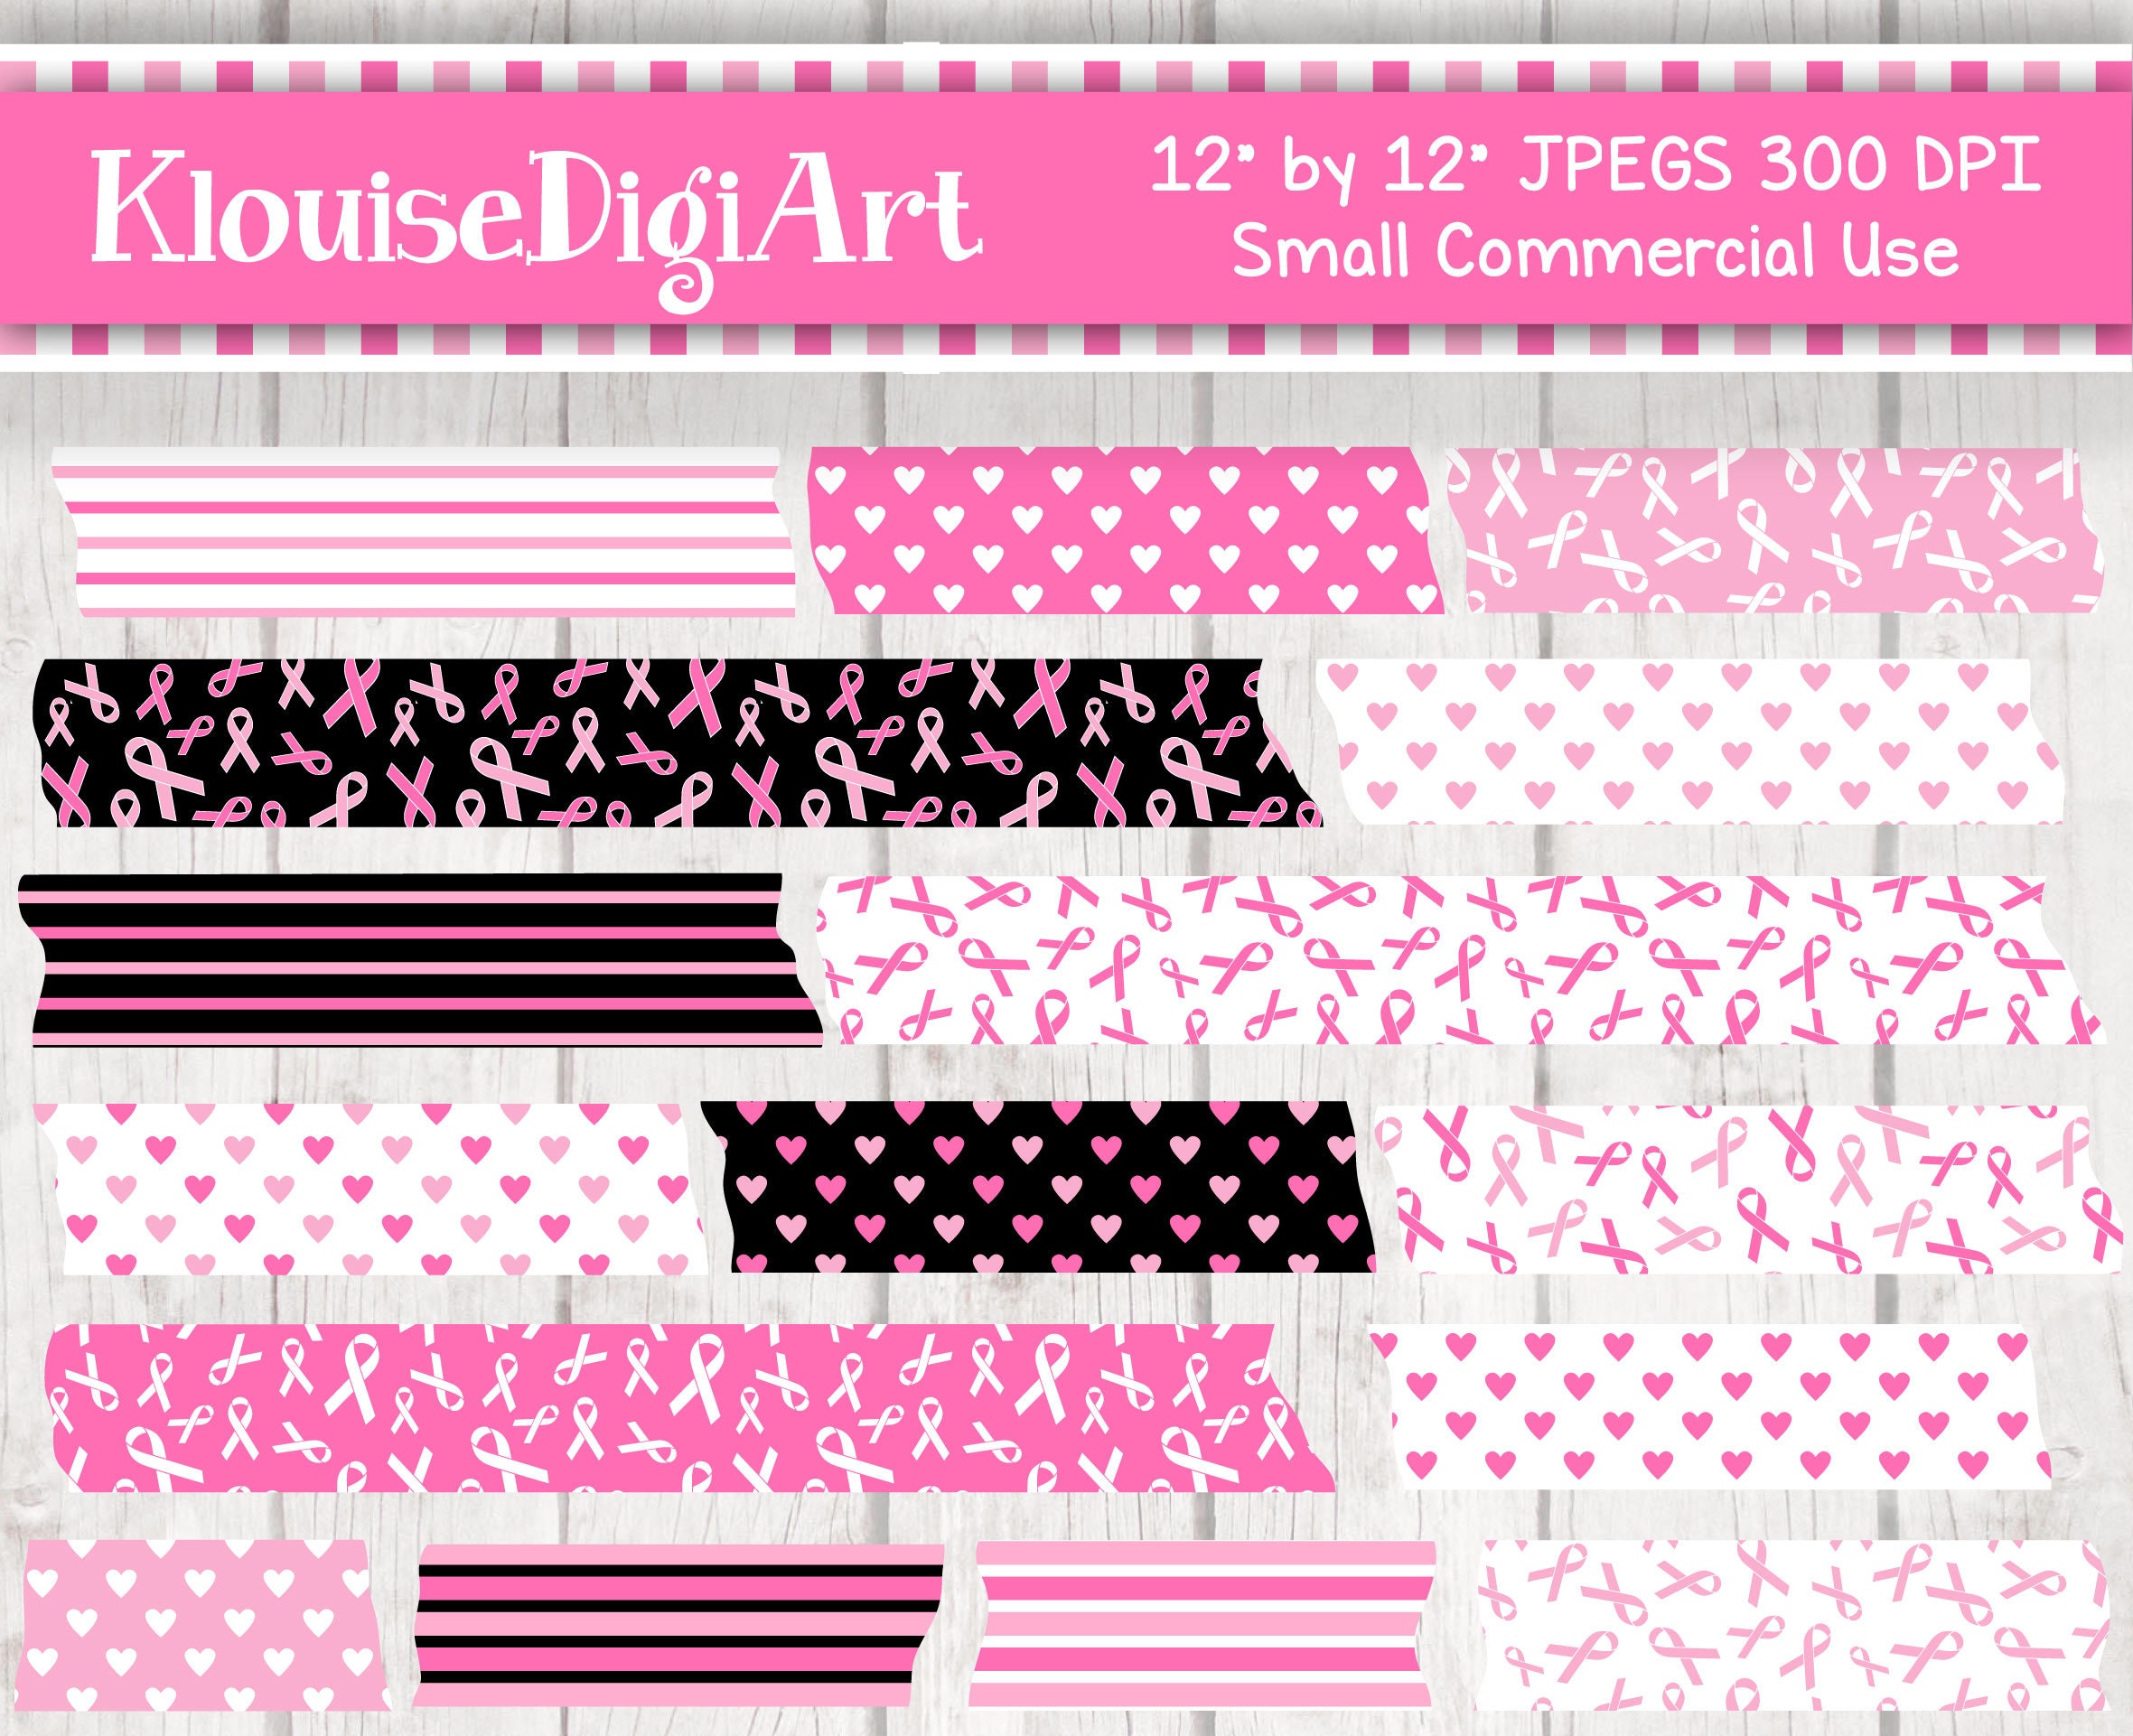 Digital Washi Tape Stickers, Washi Tape Clipart, Foil Gold Stickers,  Pattern Stickers, Washi Tape Png, Teacher Clipart, Commercial Use 